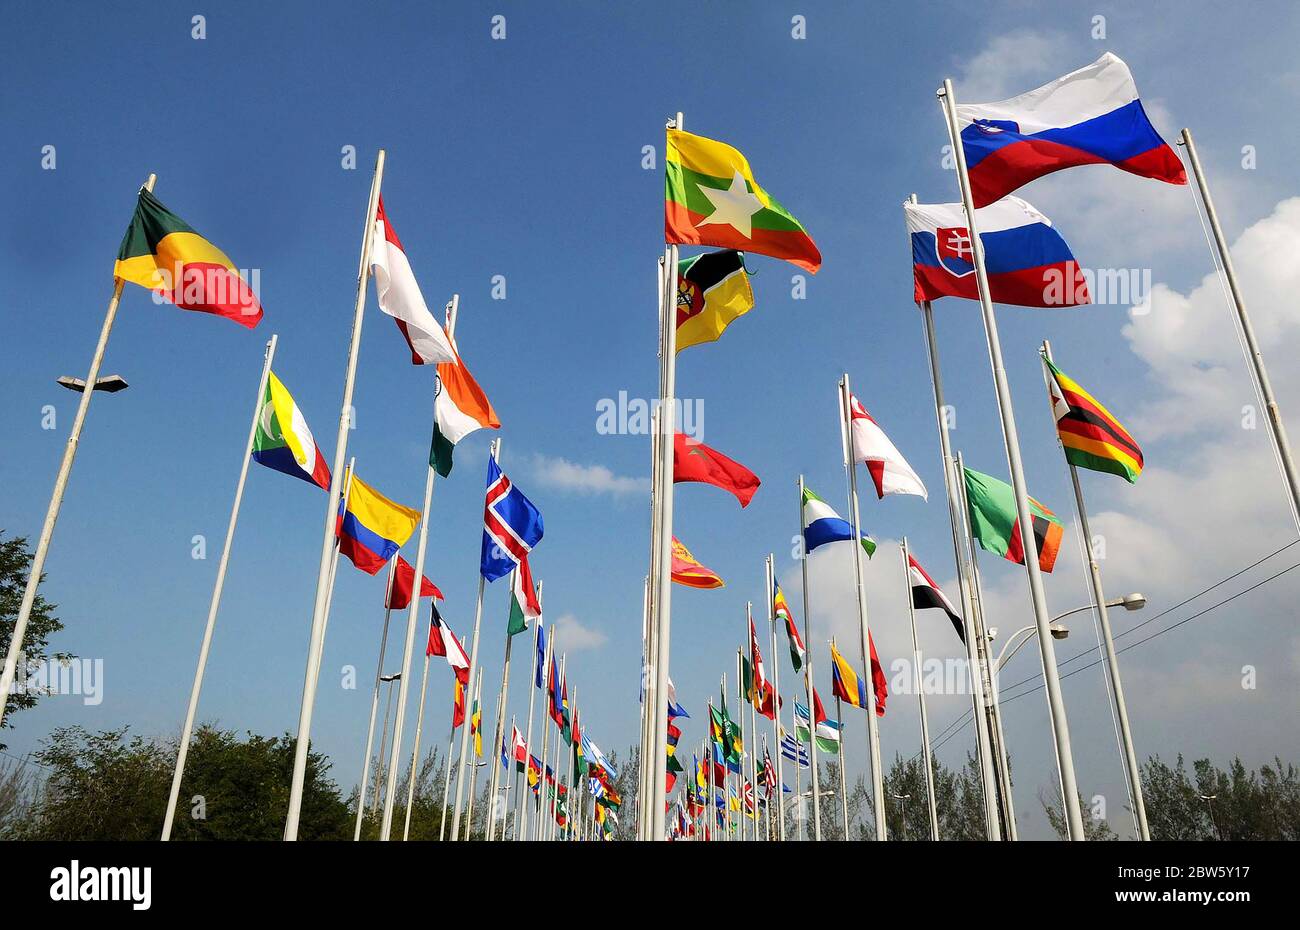 Rio de Janeiro, June 20, 2009. Flags hoisted from various countries during the Rio + 20 conference at Riocentro, in the city of Rio de Janeiro, Brazil Stock Photo